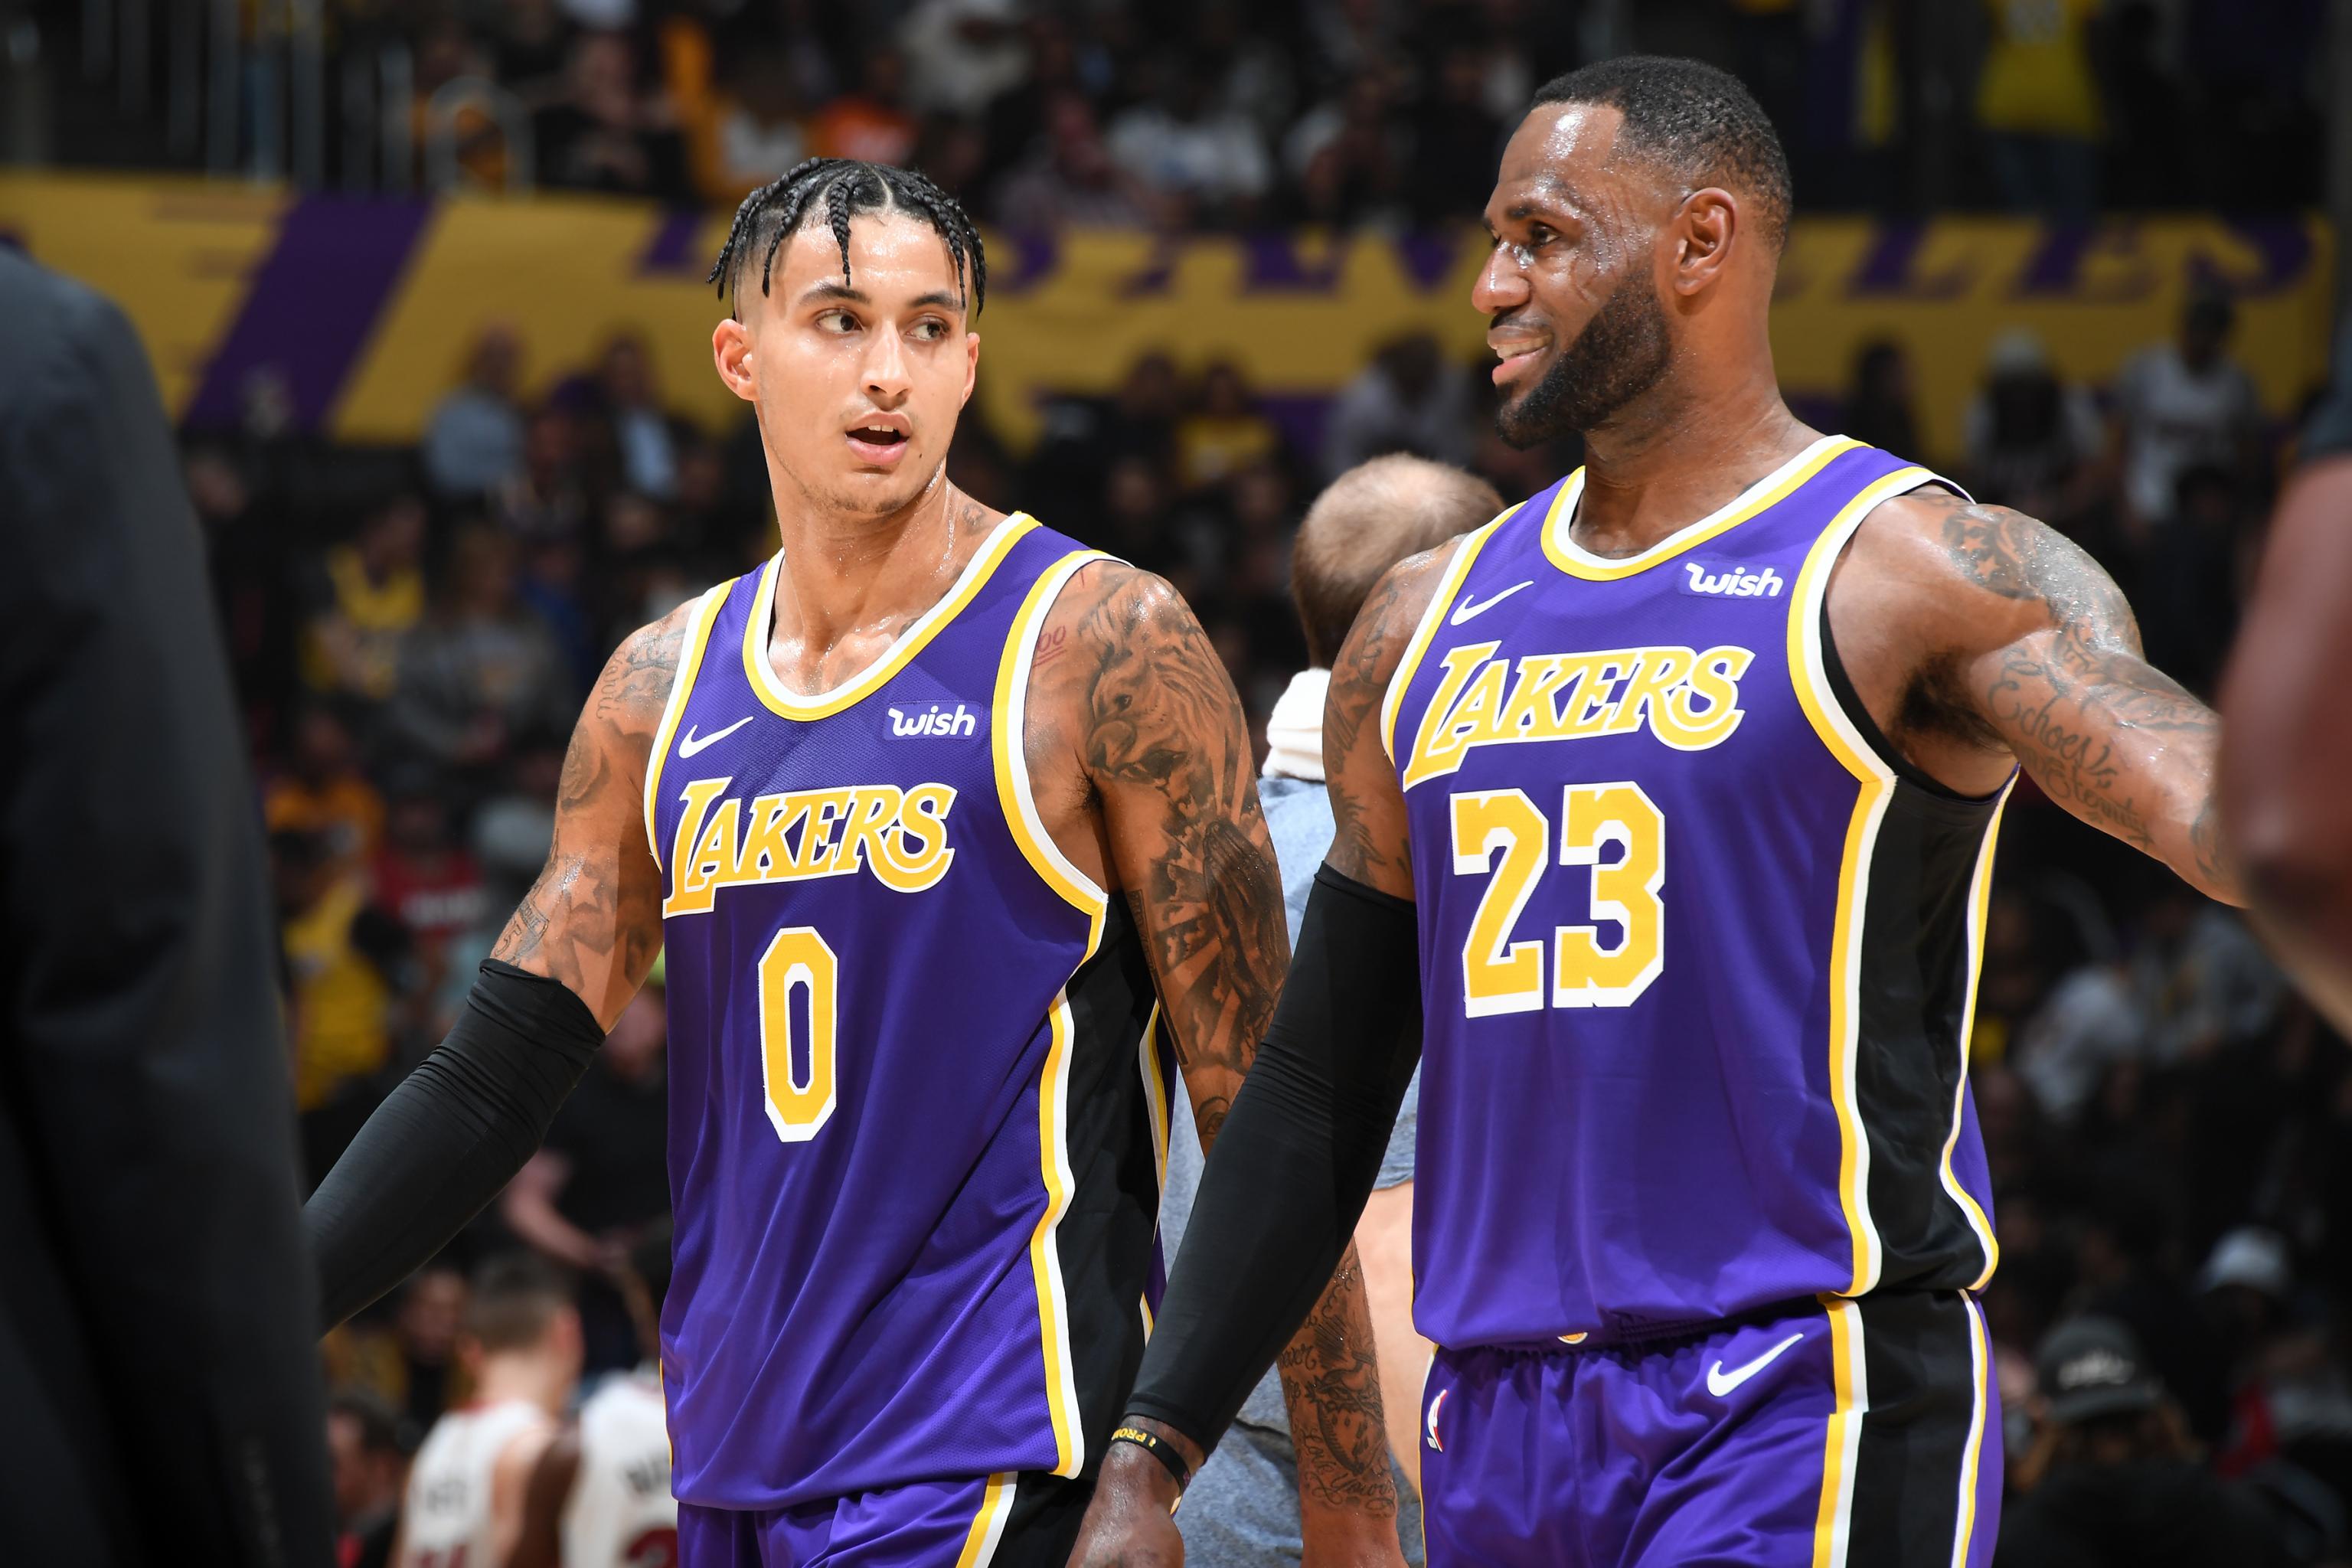 Lakers Lebron James Kyle Kuzma Spoke About Trainer S Social Media Comments Bleacher Report Latest News Videos And Highlights